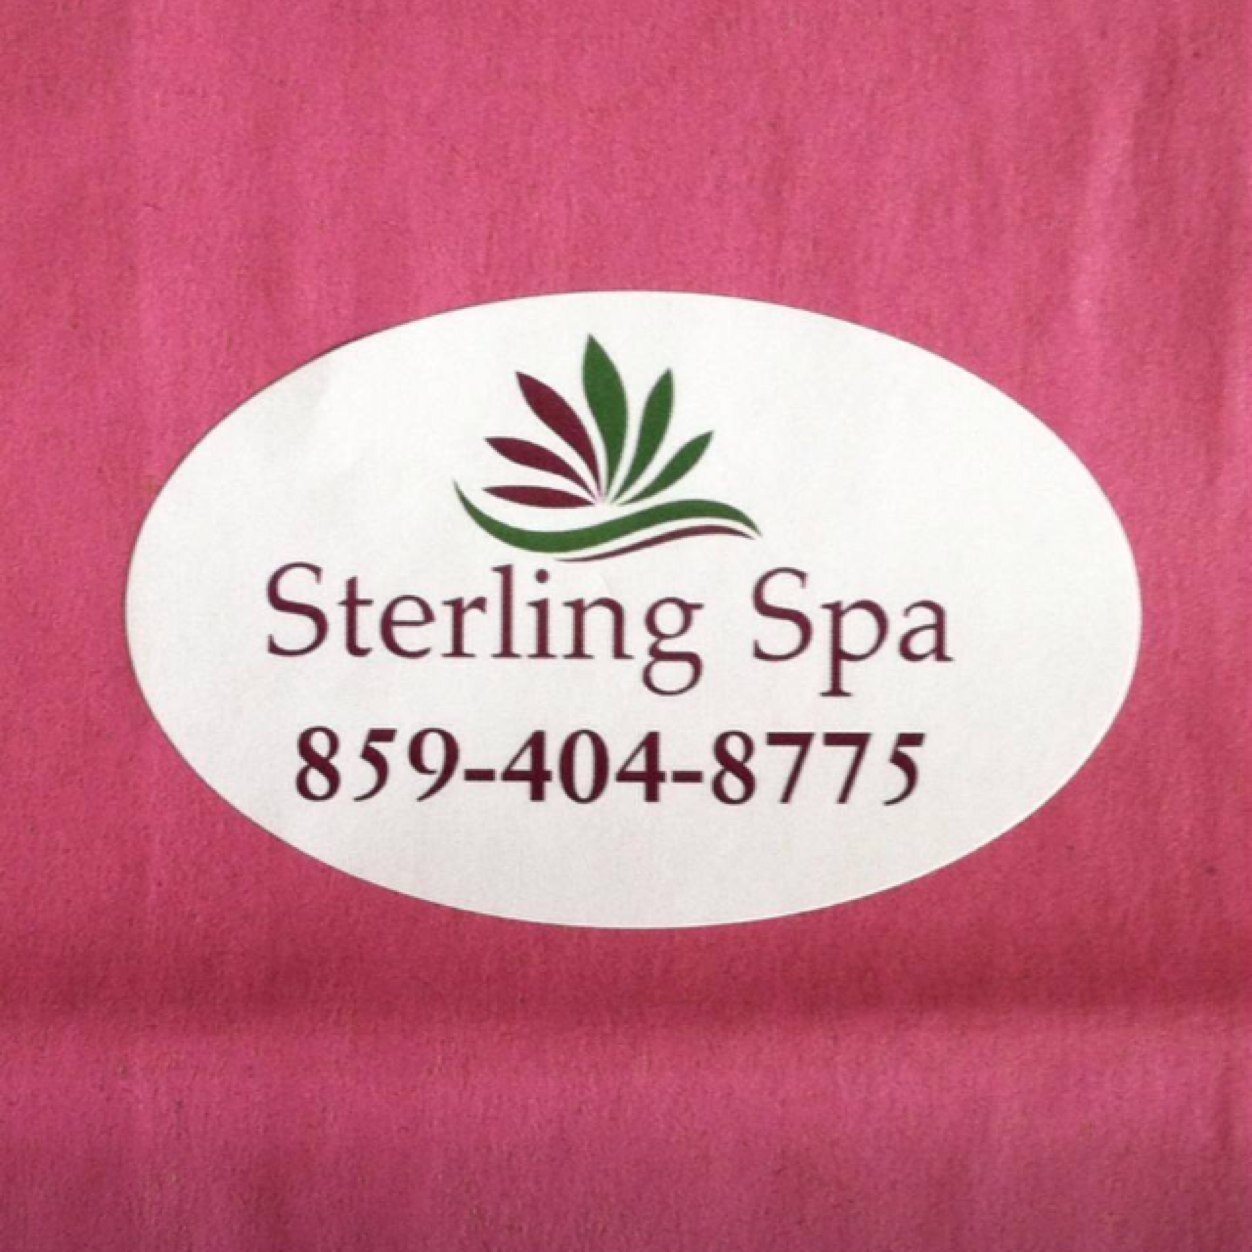 Located in the Colony Shops beside Paris Nails, come visit us today! •••••••••••••Facebook: Sterling Spa••••••••••• ••••••••Instagram: @sterlingspa2013•••••••••